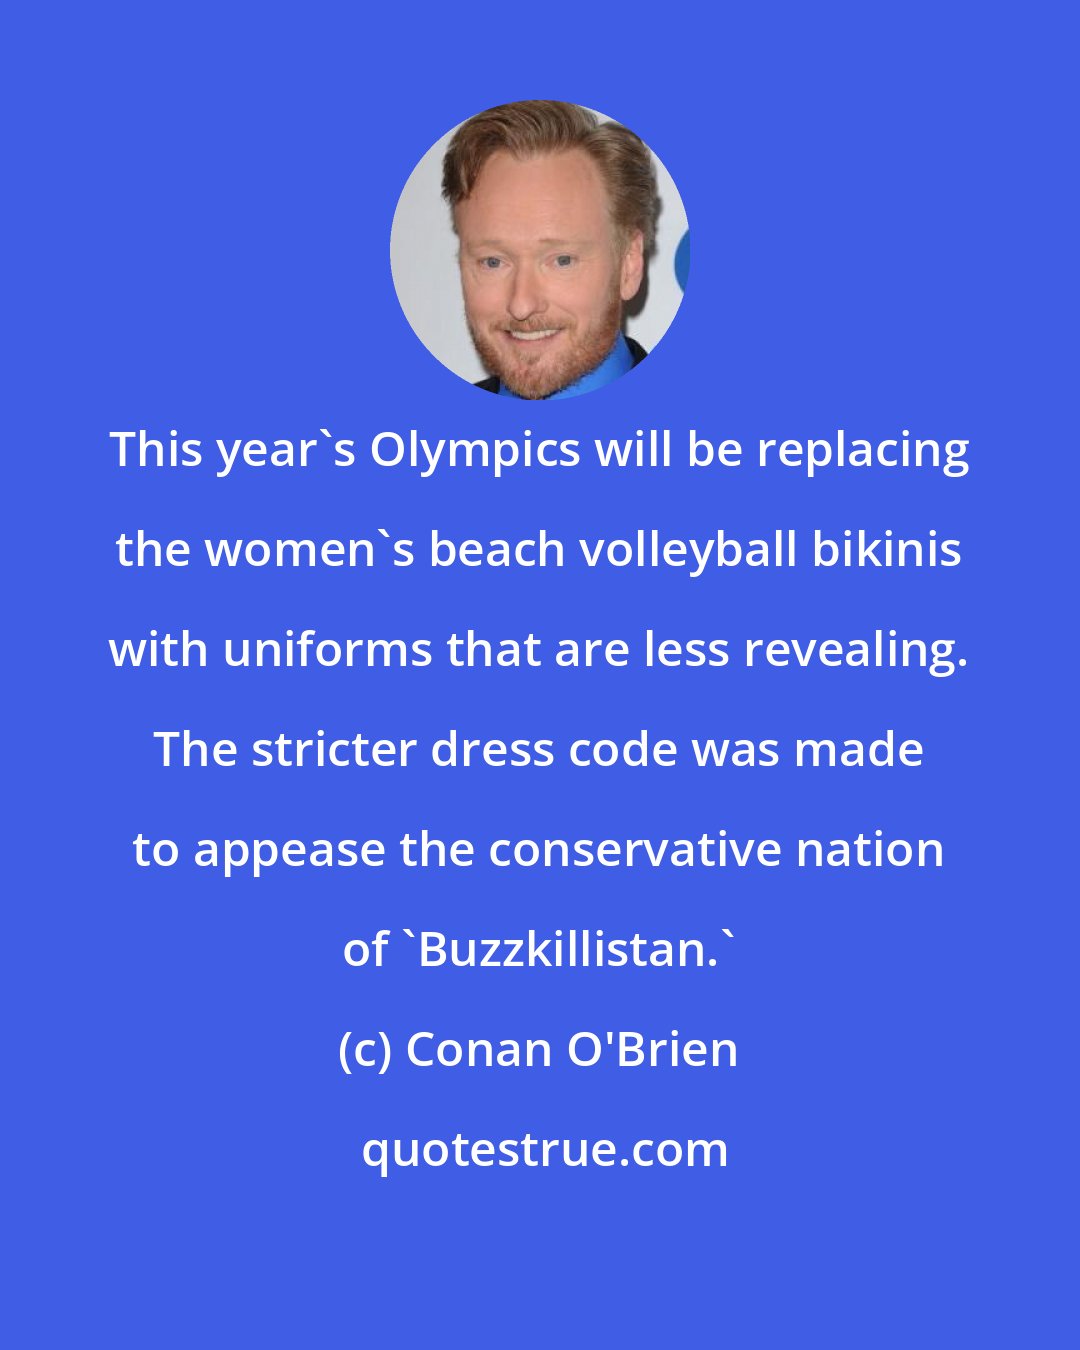 Conan O'Brien: This year's Olympics will be replacing the women's beach volleyball bikinis with uniforms that are less revealing. The stricter dress code was made to appease the conservative nation of 'Buzzkillistan.'